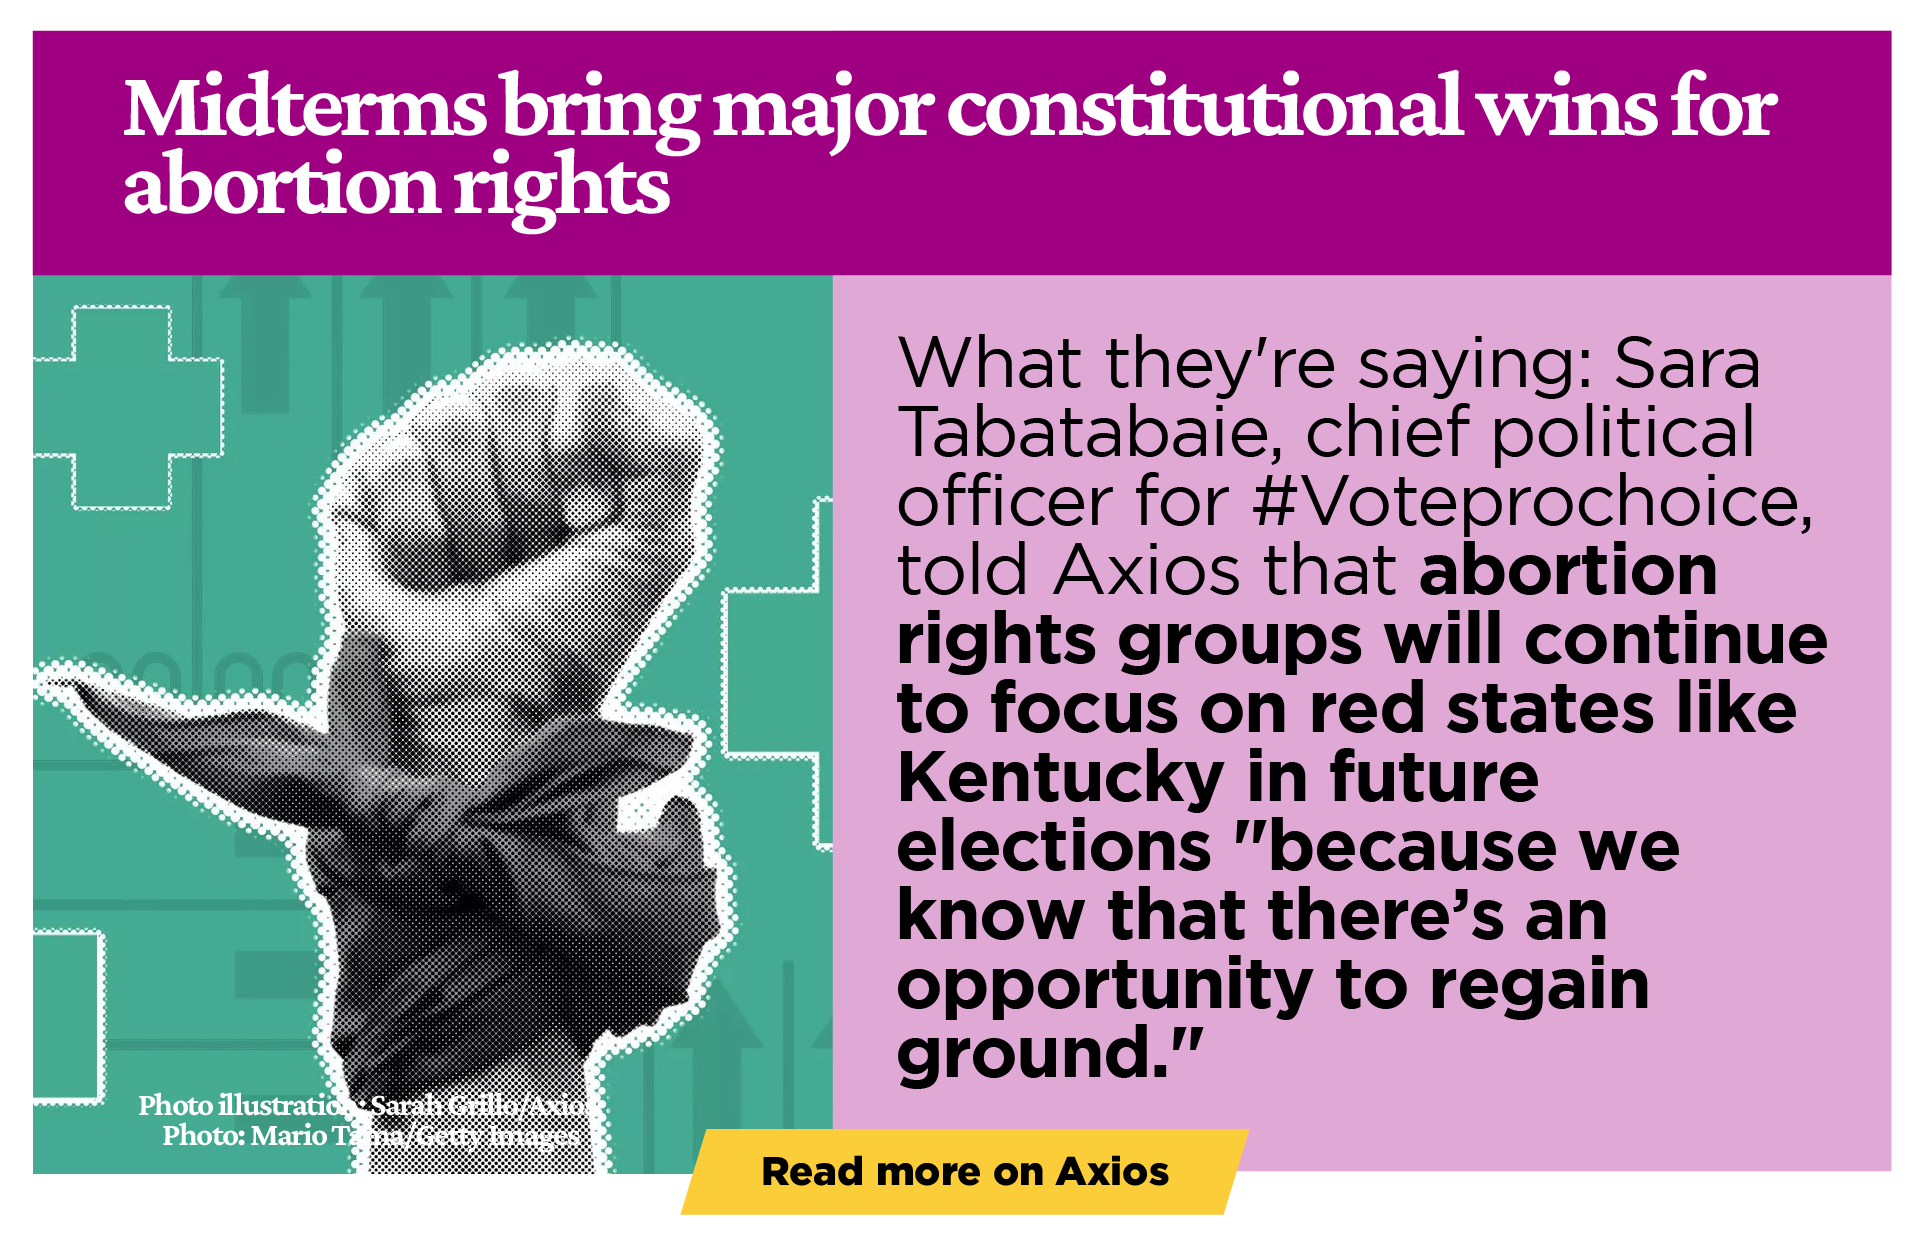 Midterms bring major constitutional wins for abortion rights: What they're saying: Sara Tabatabaie, chief political officer for #Voteprochoice, told Axios that abortion rights groups will continue to focus on red states like Kentucky in future elections 